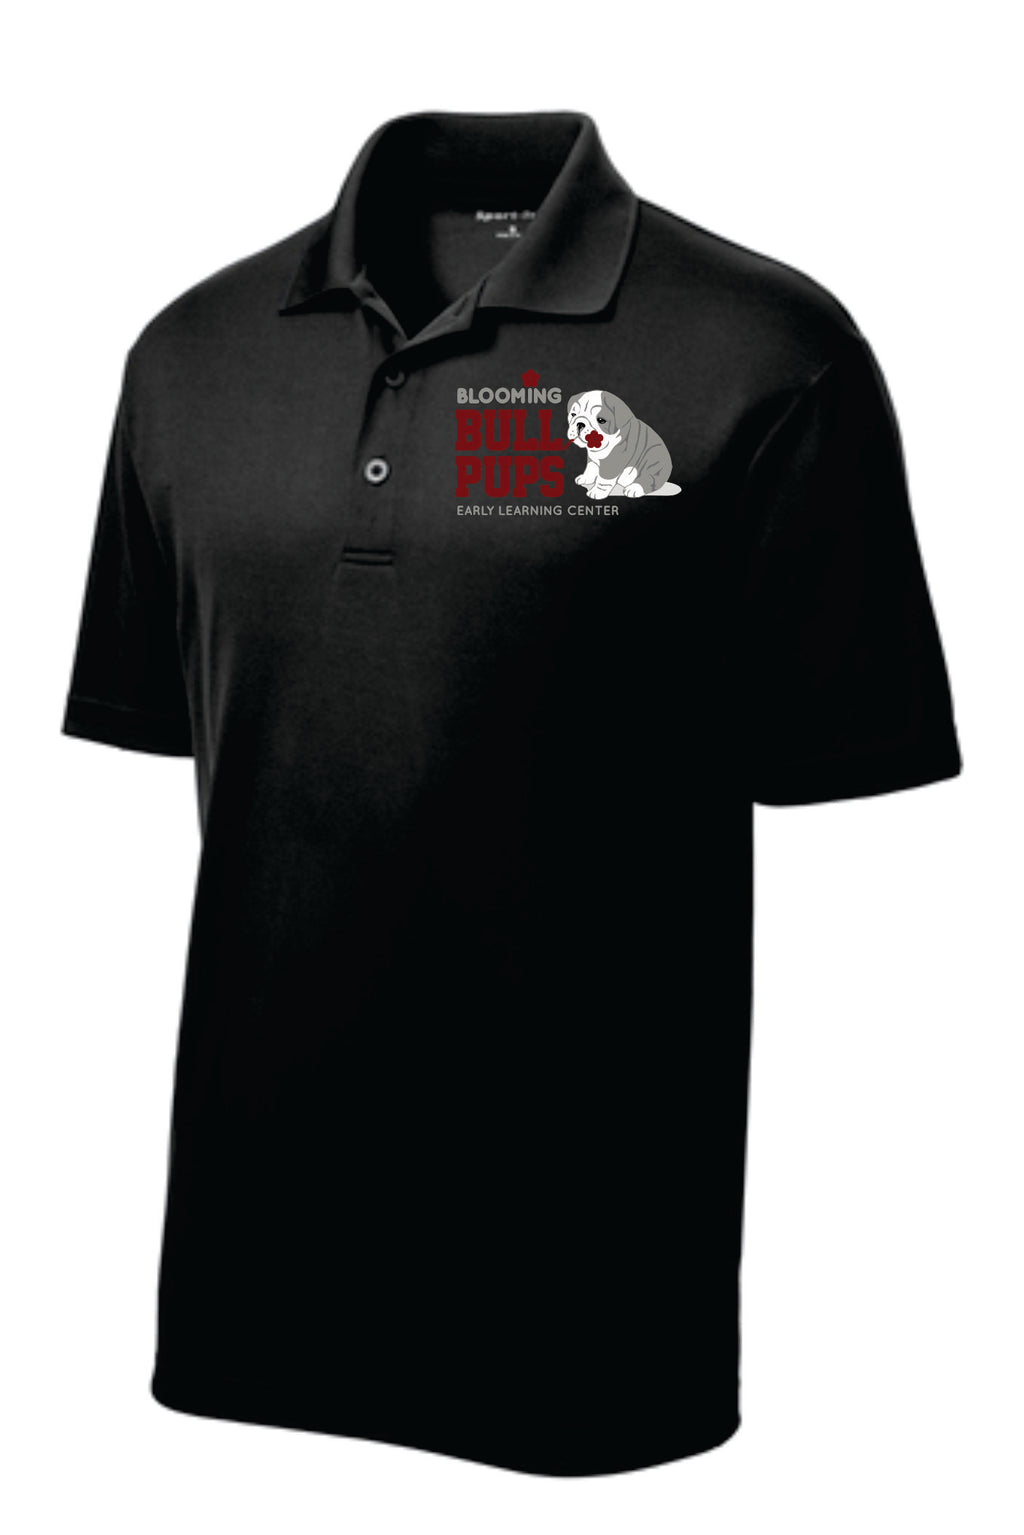 BLOOMING BULLPUP YOUTH POLOS